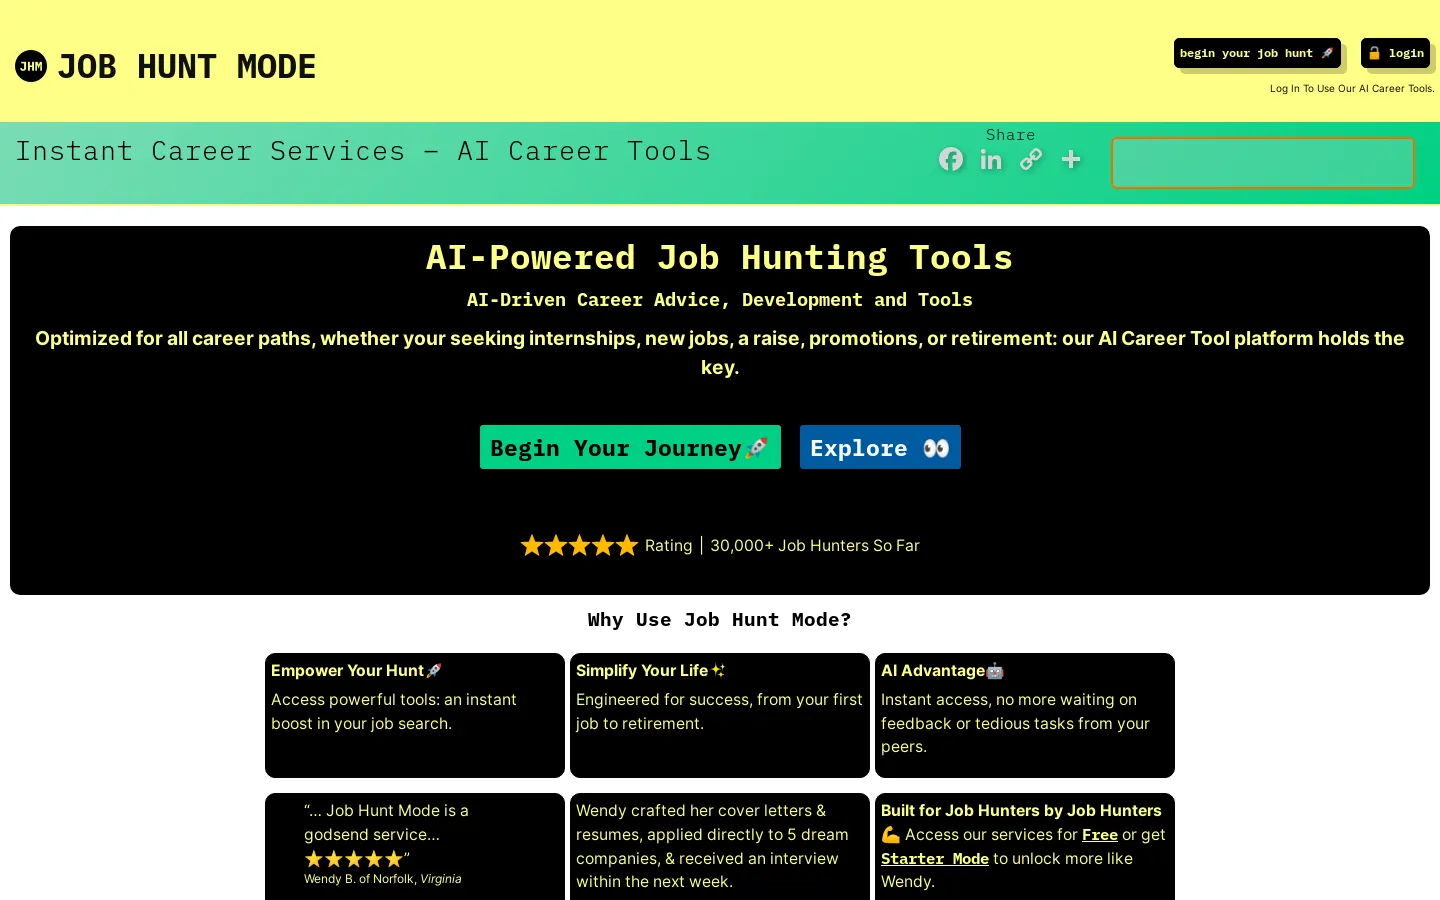 Instant Career Services - AI Career Tools - Job Hunt Mode